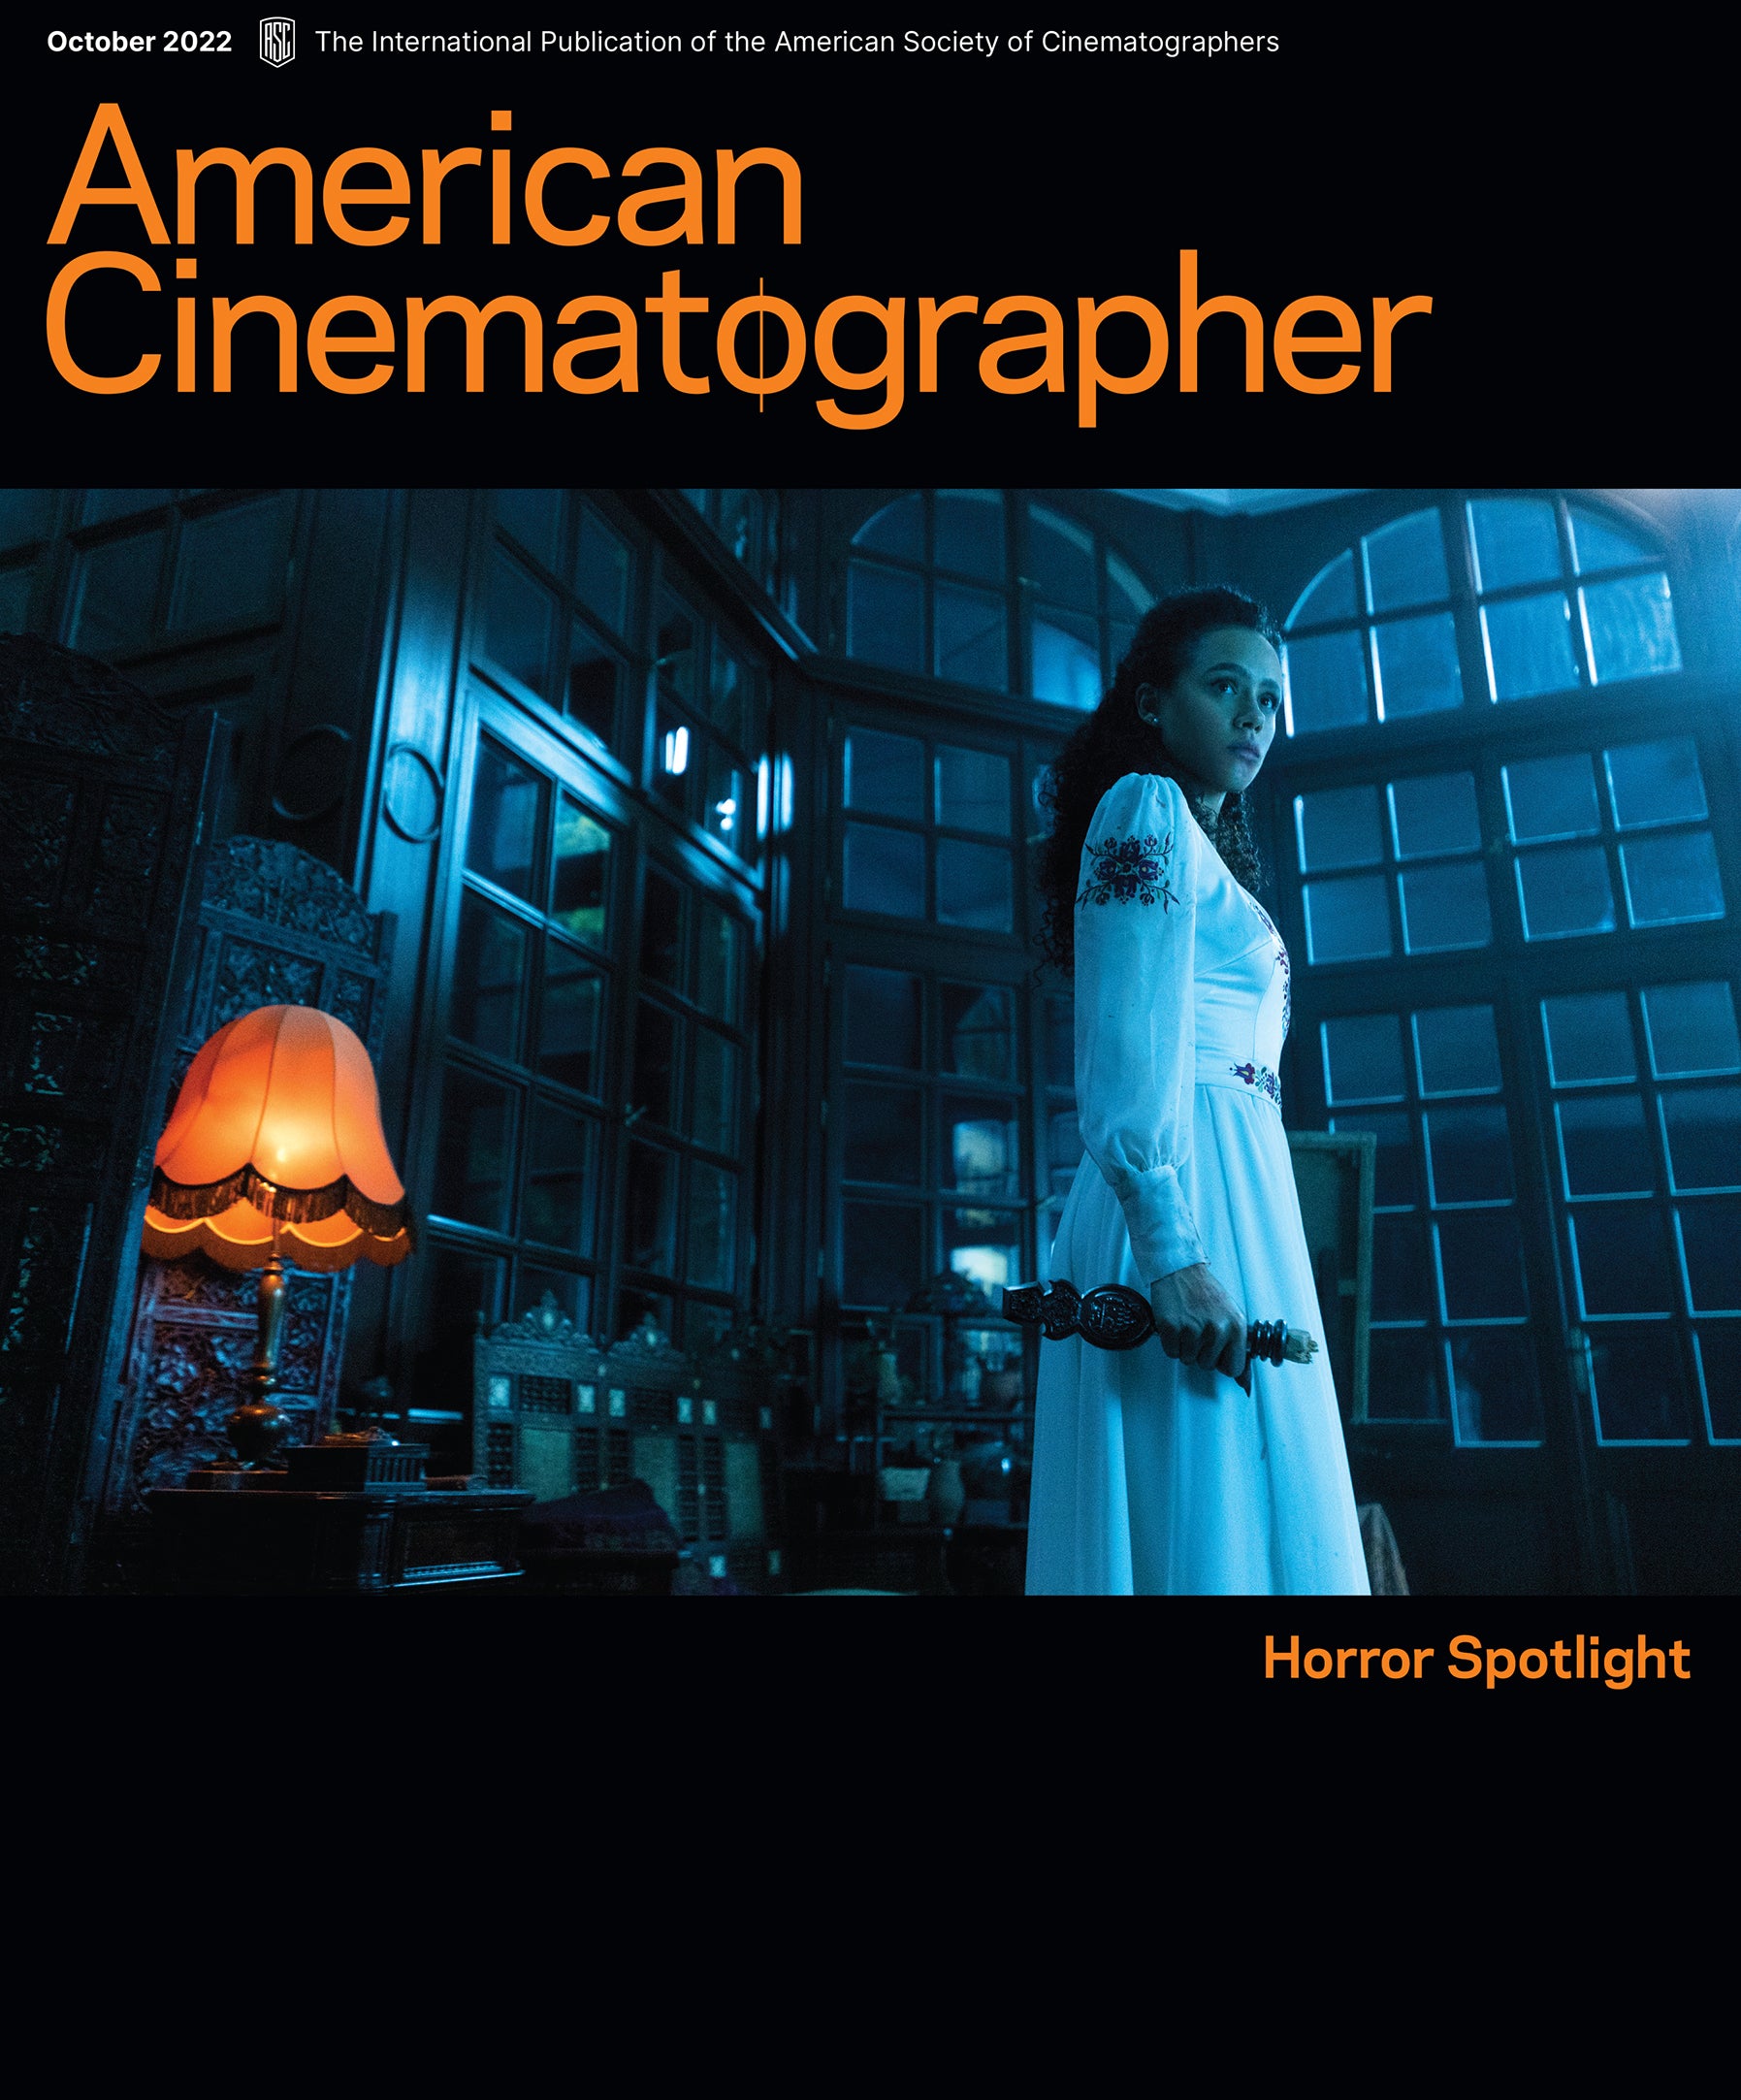 October 2022 Issue of American Cinematographer